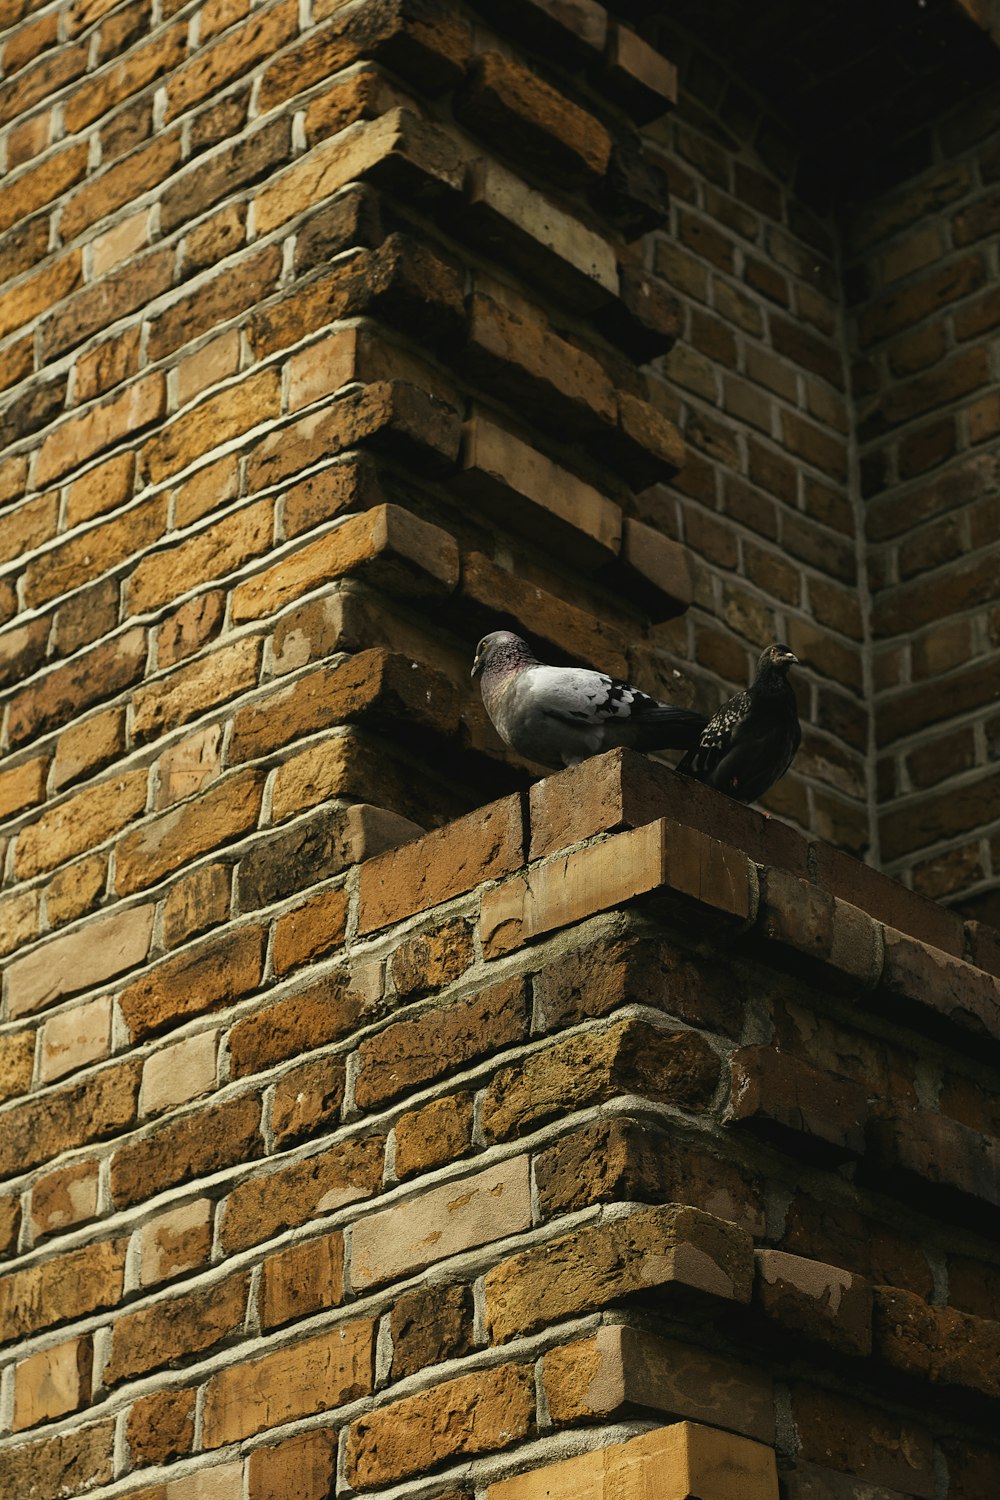 a pigeon sitting on the ledge of a brick building